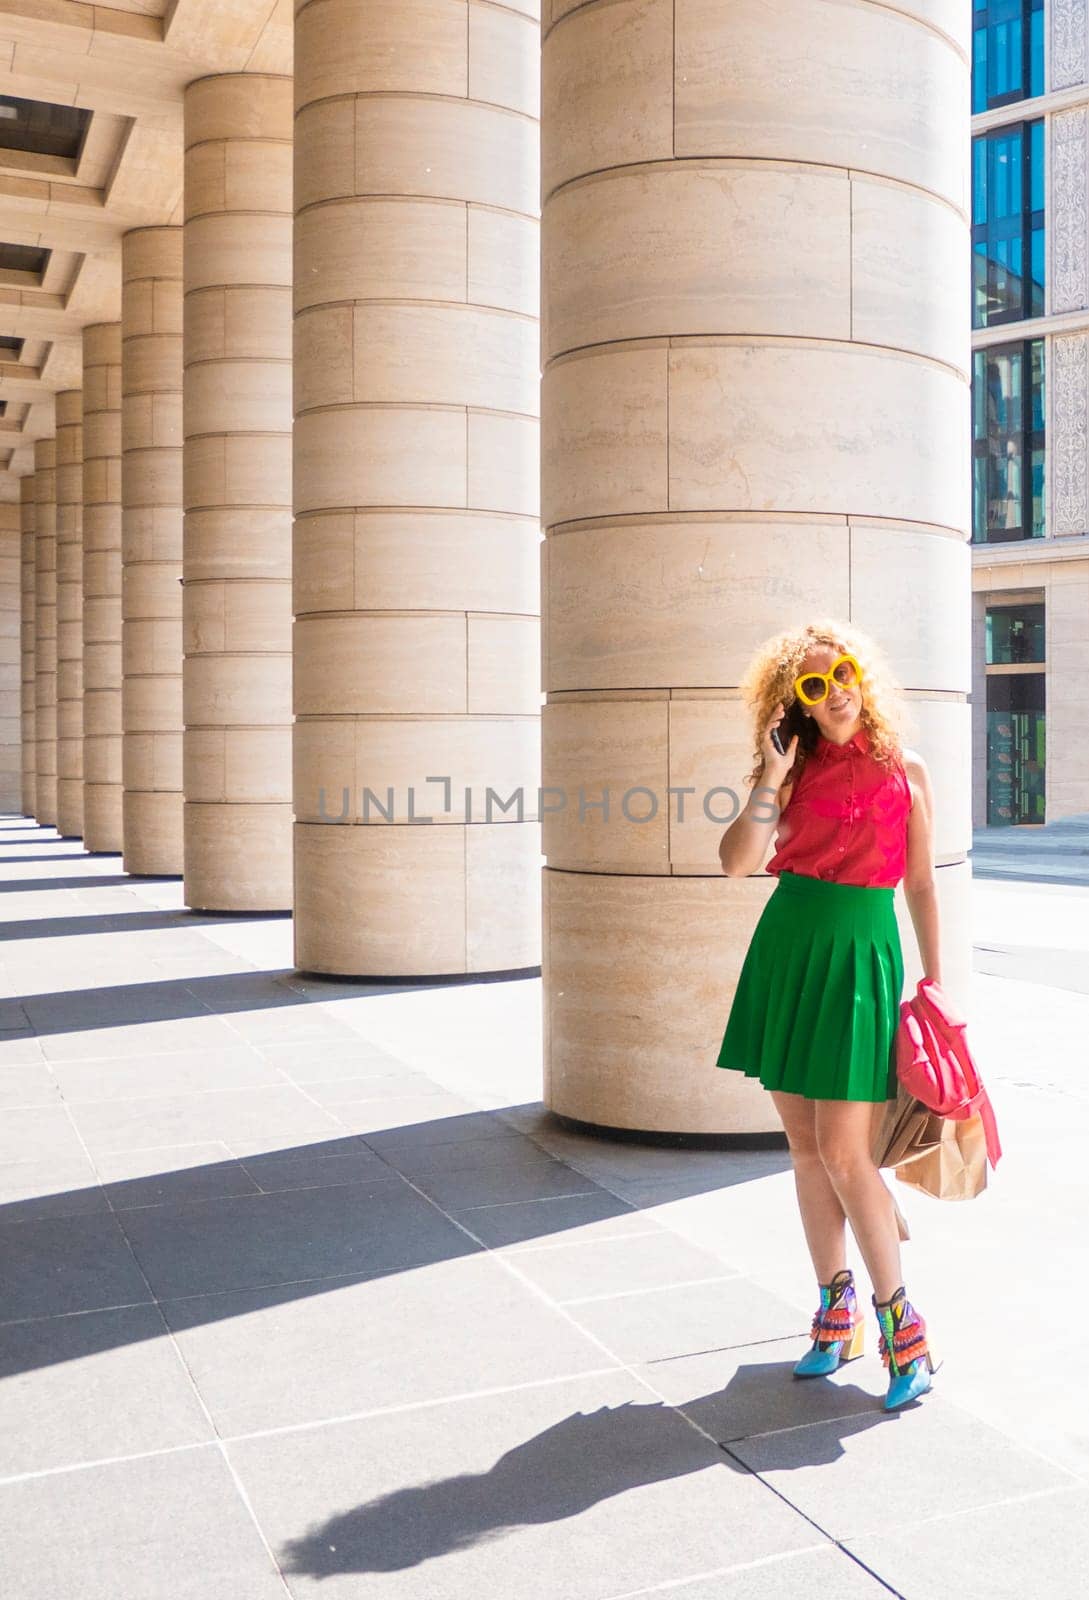 Content fashion female with bag walking on pavement near stone columns in sunlight and talk cell phone. by kajasja